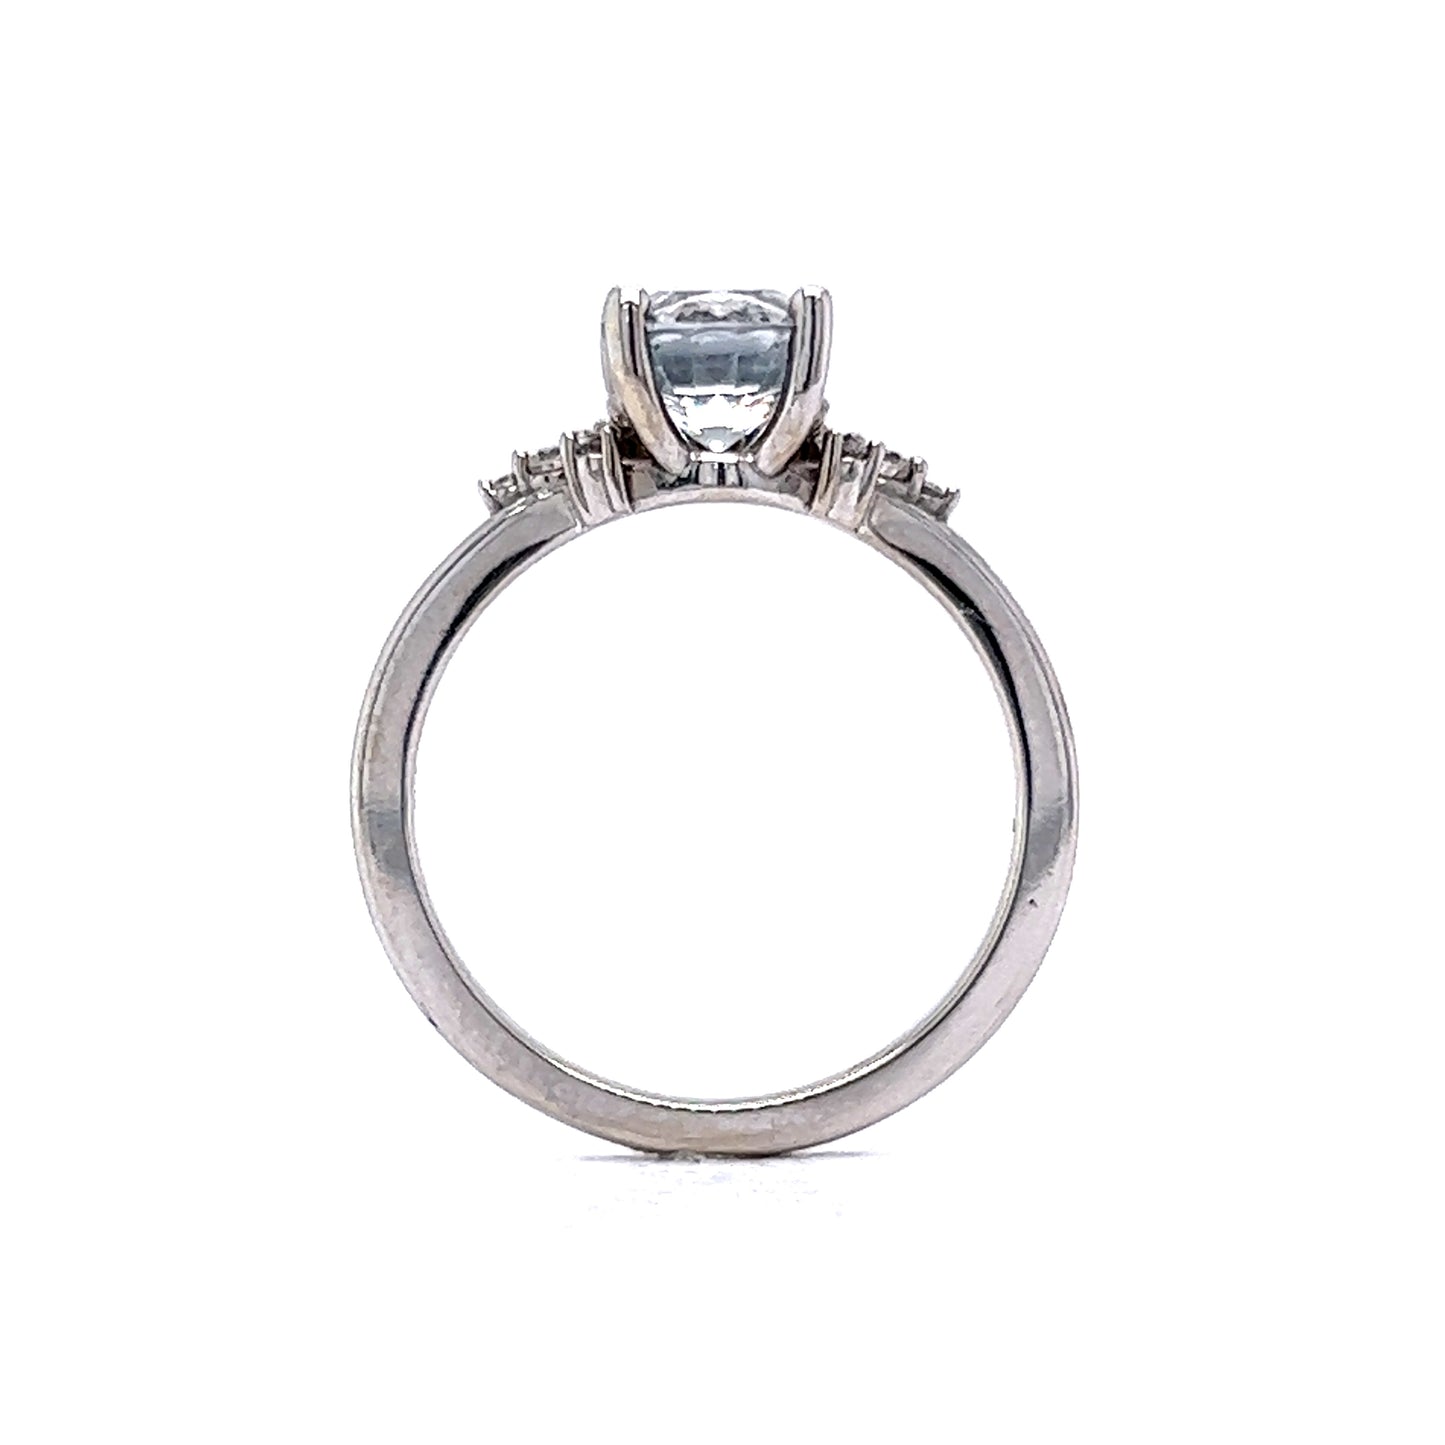 Grey Spinel Engagement Ring w/ Diamond Accents in White Gold